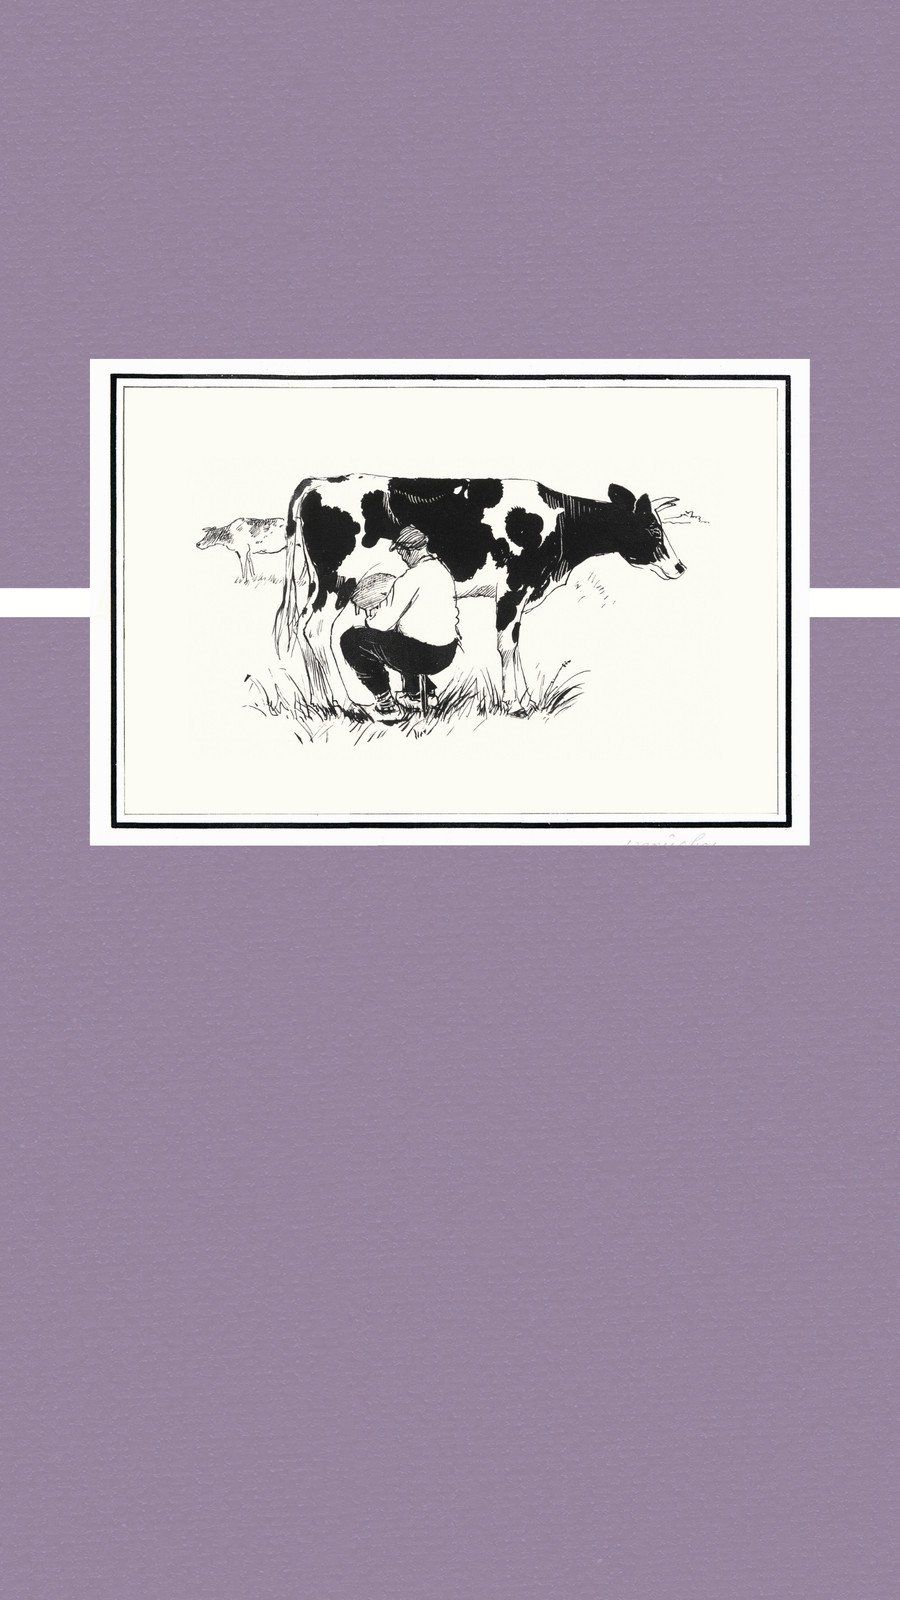 A book cover with the title cow - Cow